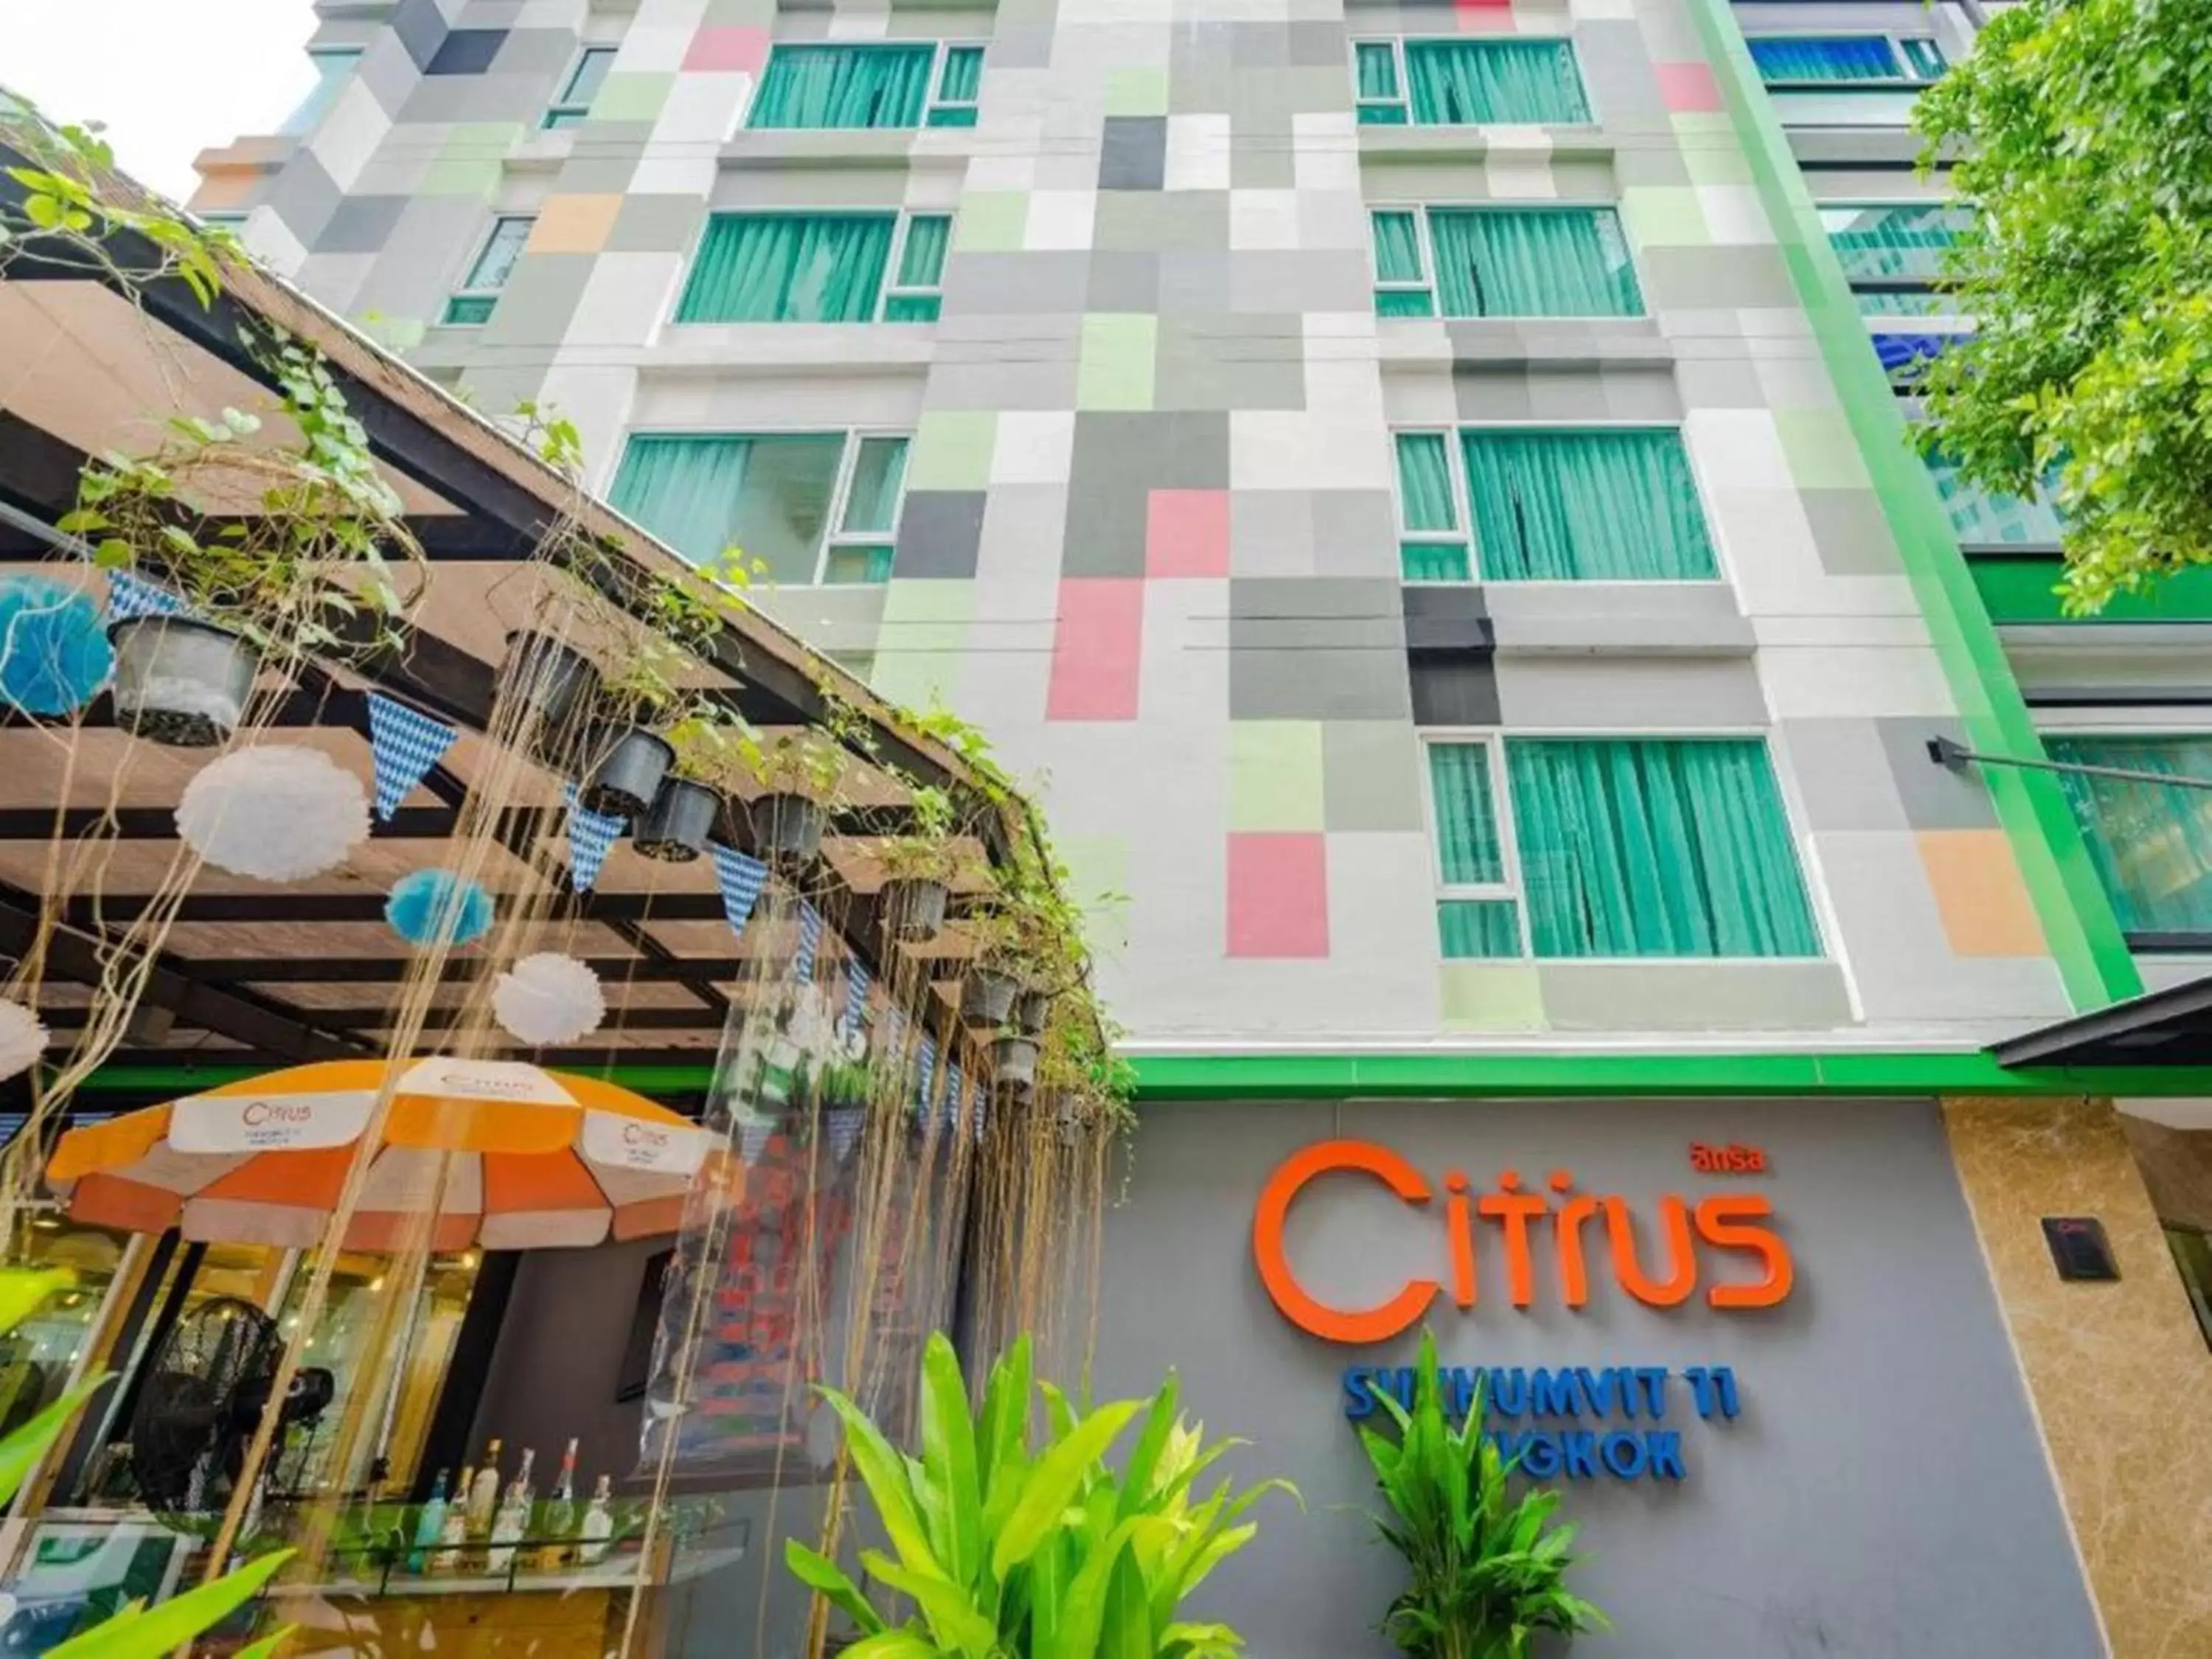 Property logo or sign, Property Building in Citrus Sukhumvit 11 by Compass Hospitality